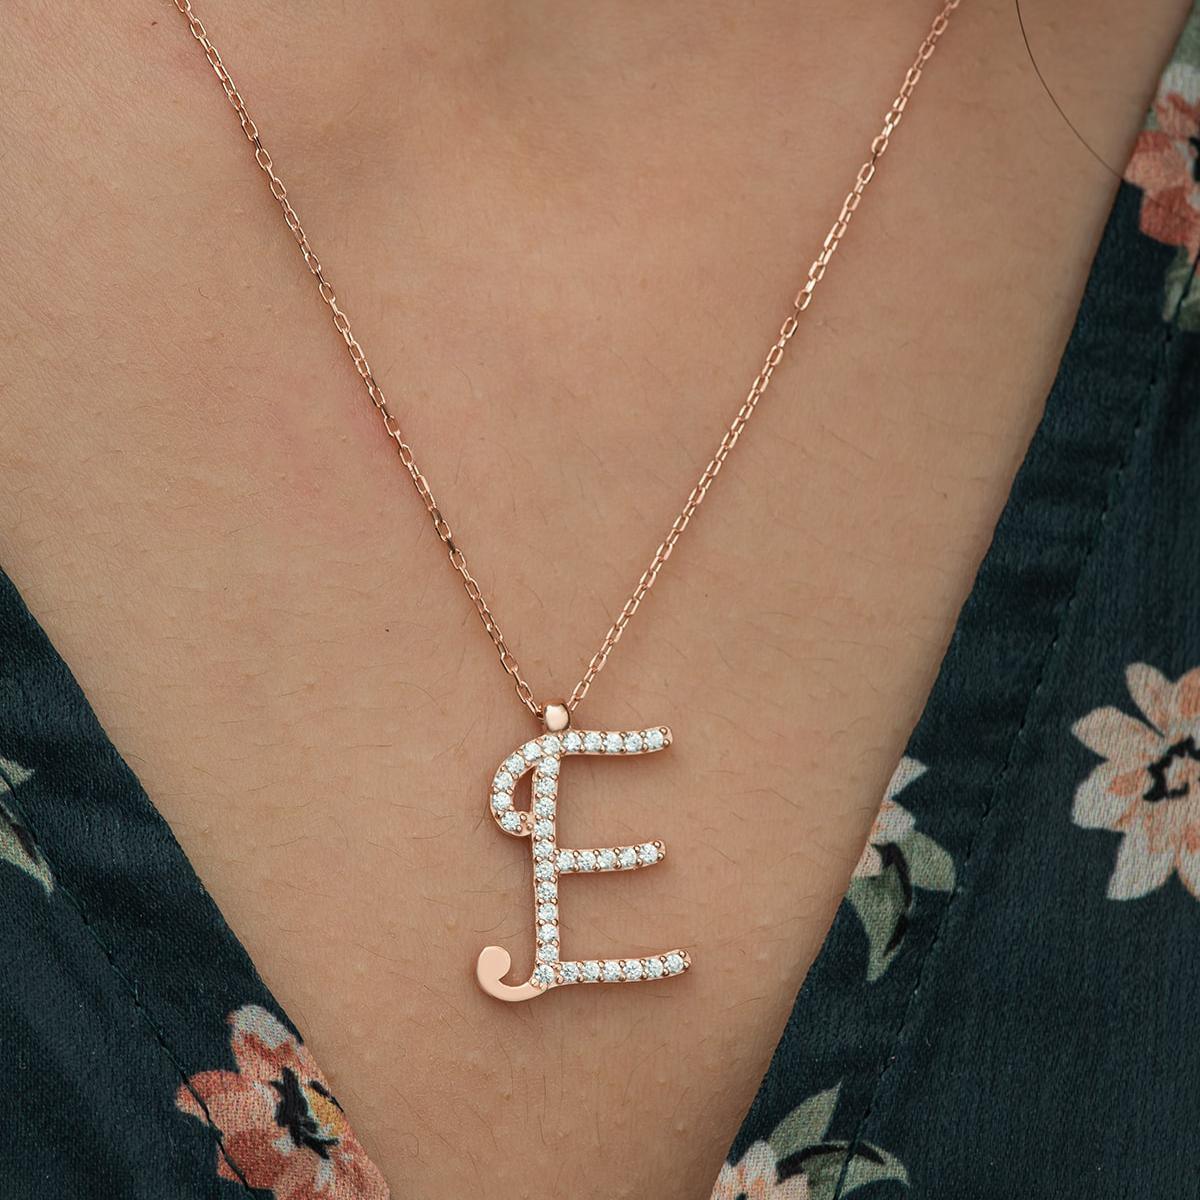 E Initial Necklace Gold • E Letter Necklace Diamond • Gift For Her - Trending Silver Gifts